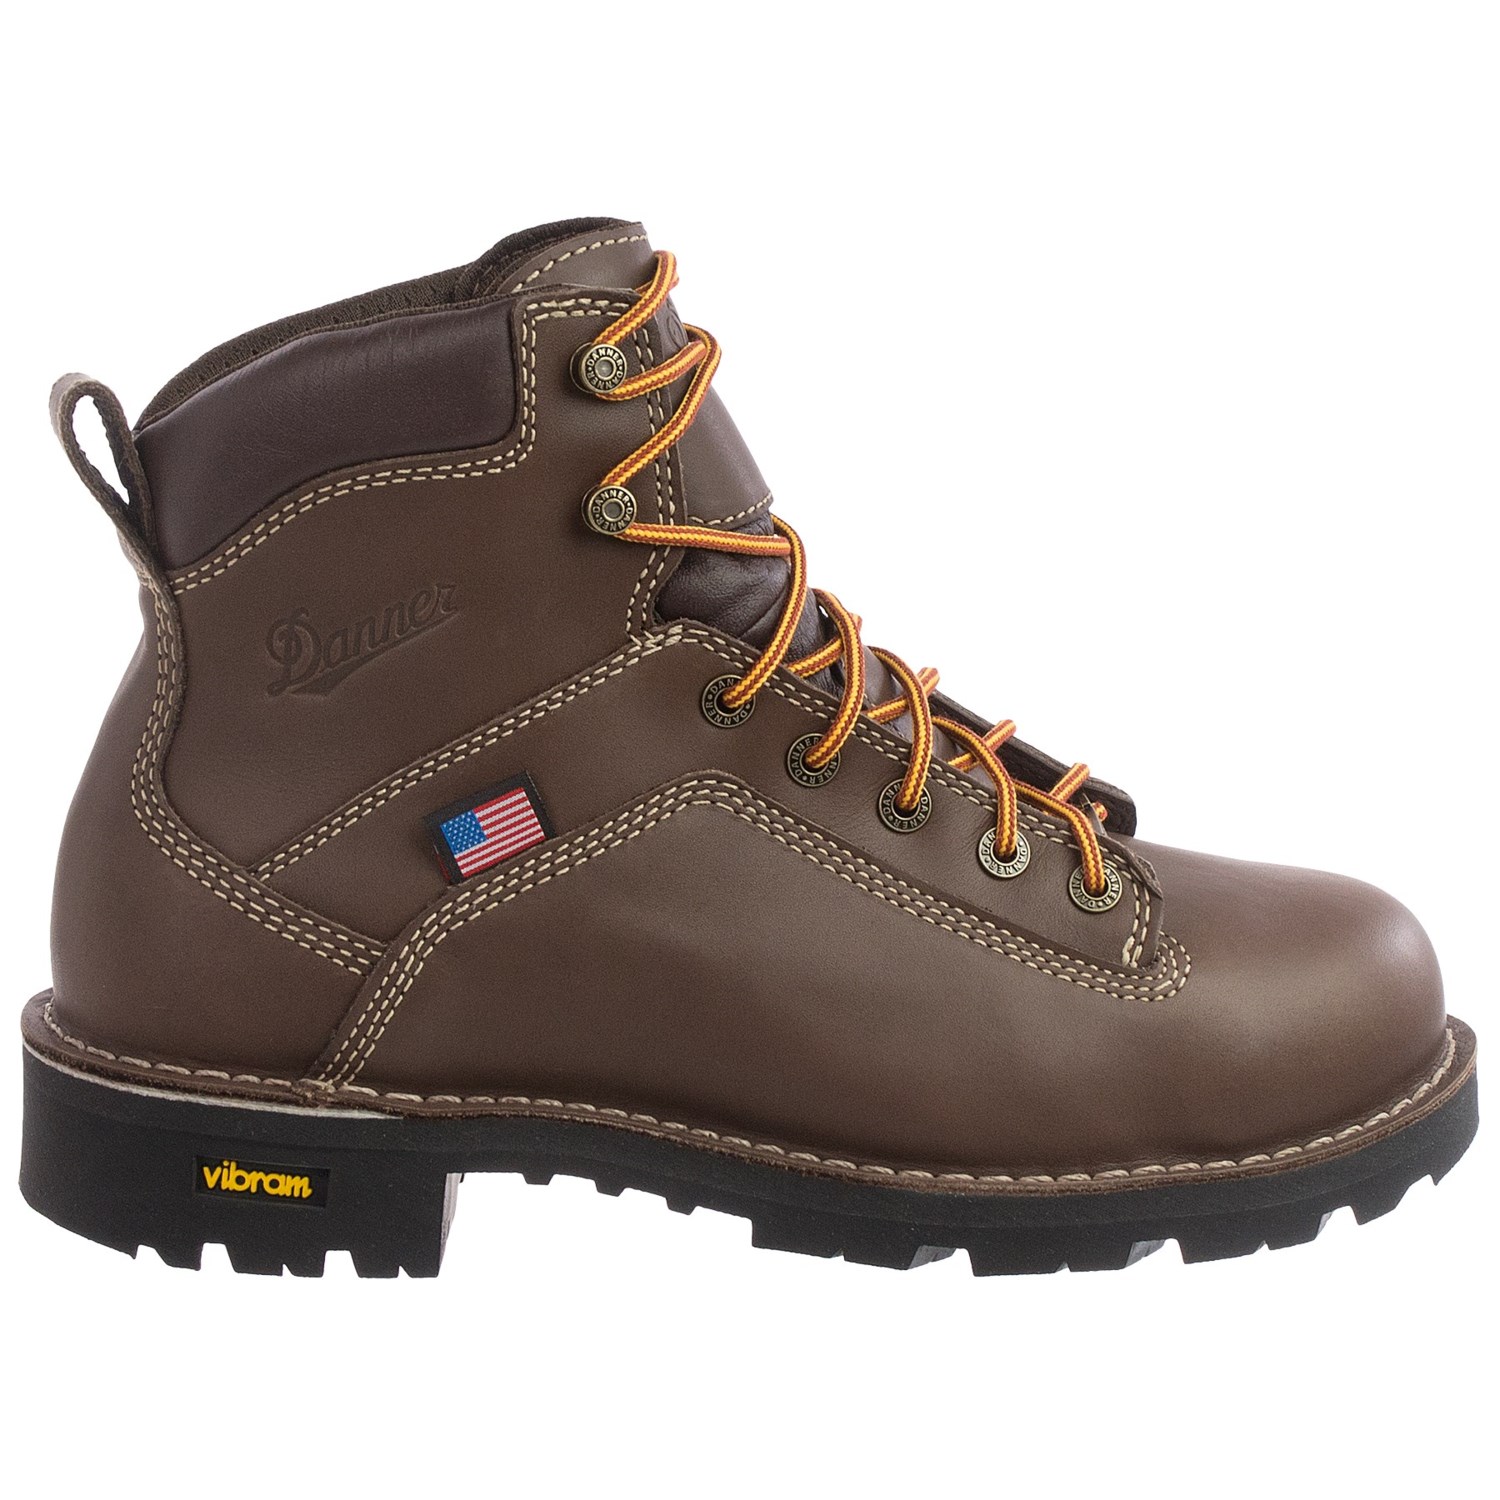 Danner Quarry Gore-Tex® Work Boots (For Men) - Save 29%